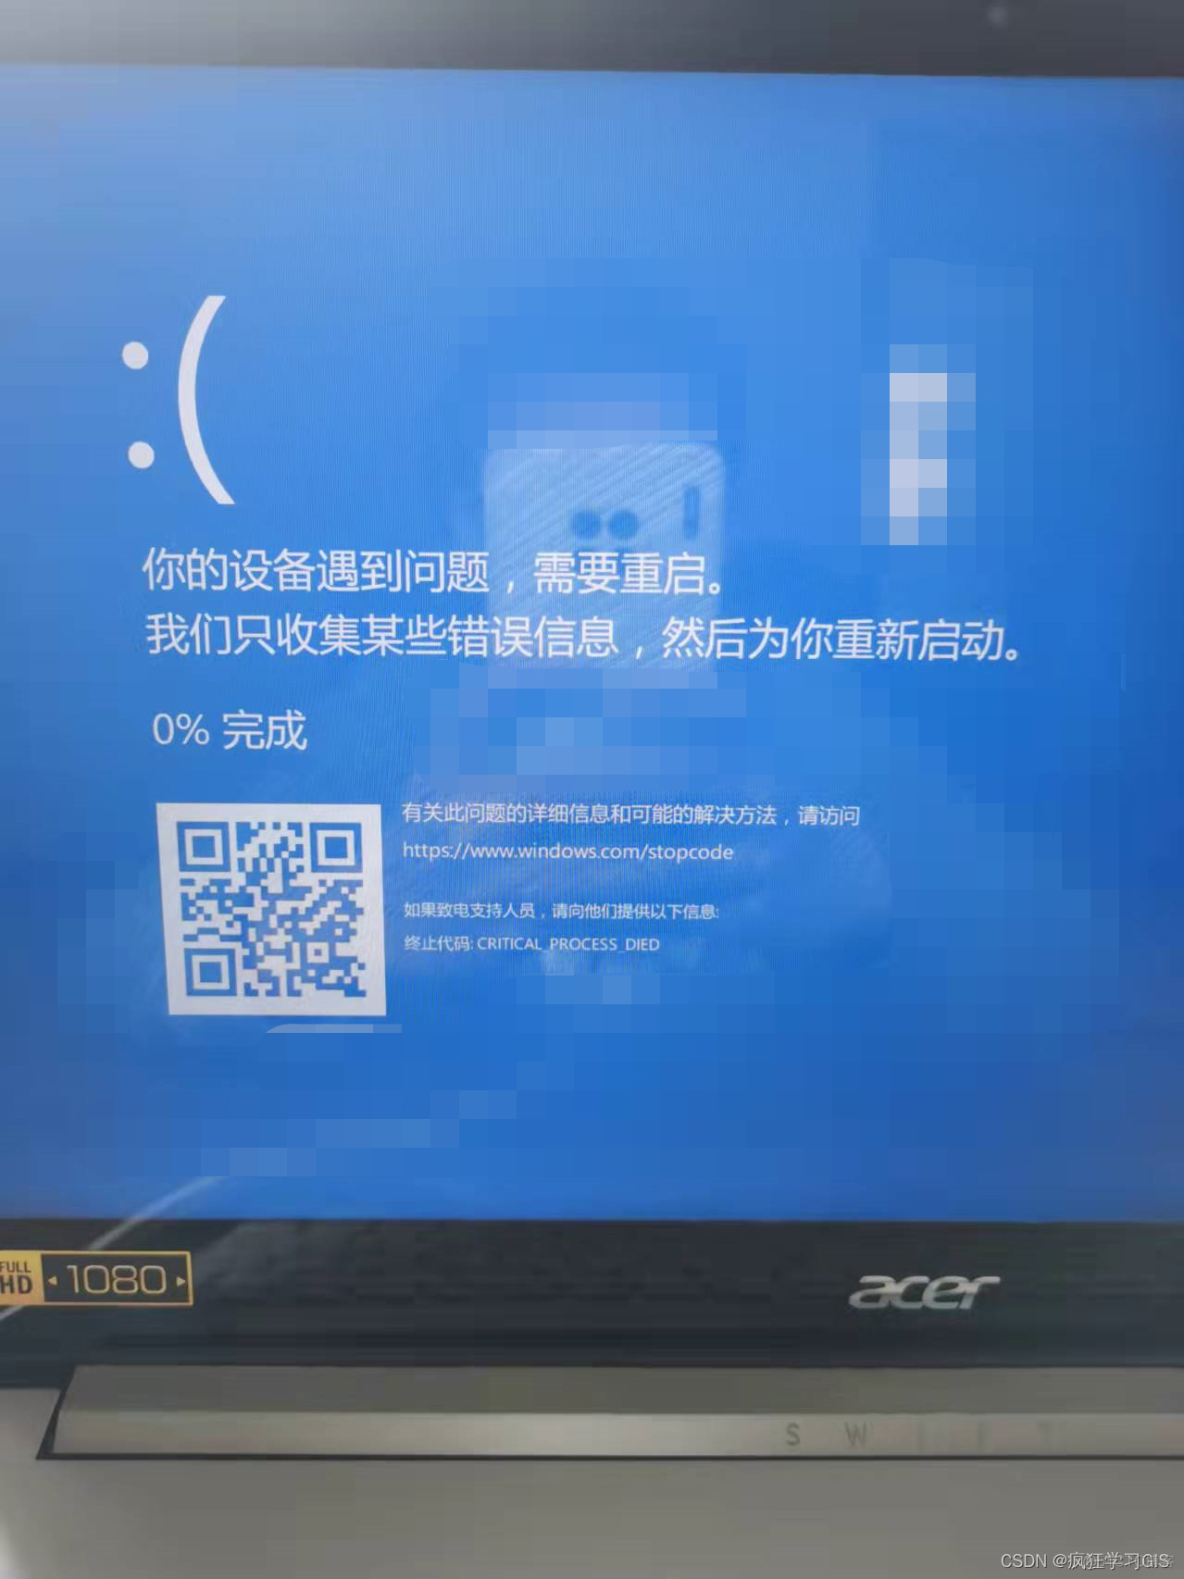 BOOT_COMPLETED在systemserver启动之后 the boot device_Windows 10